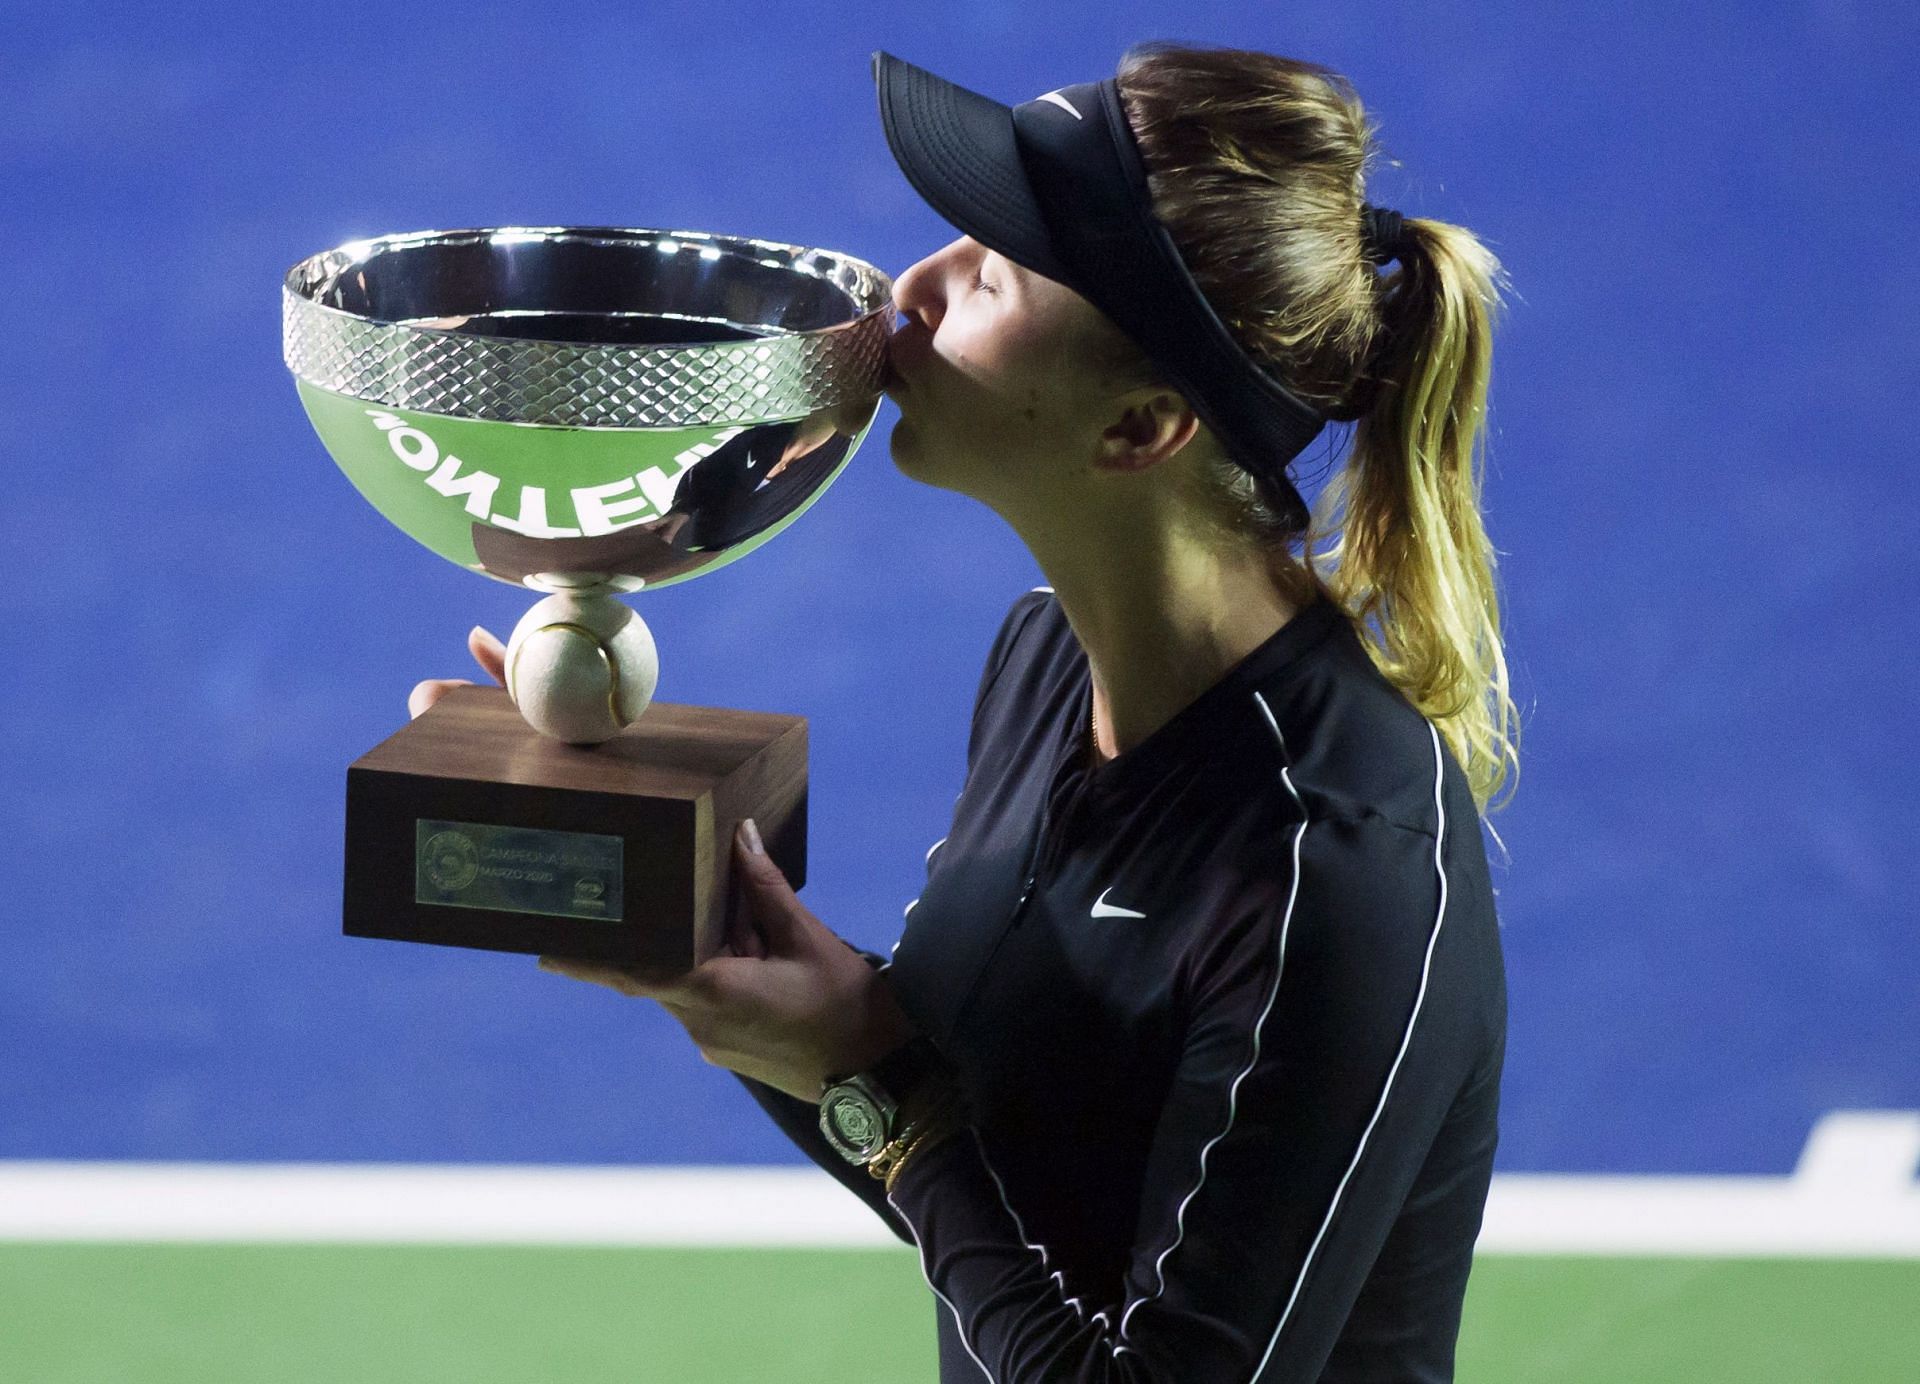 The World No. 15 with the 2020 Monterray Open trophy